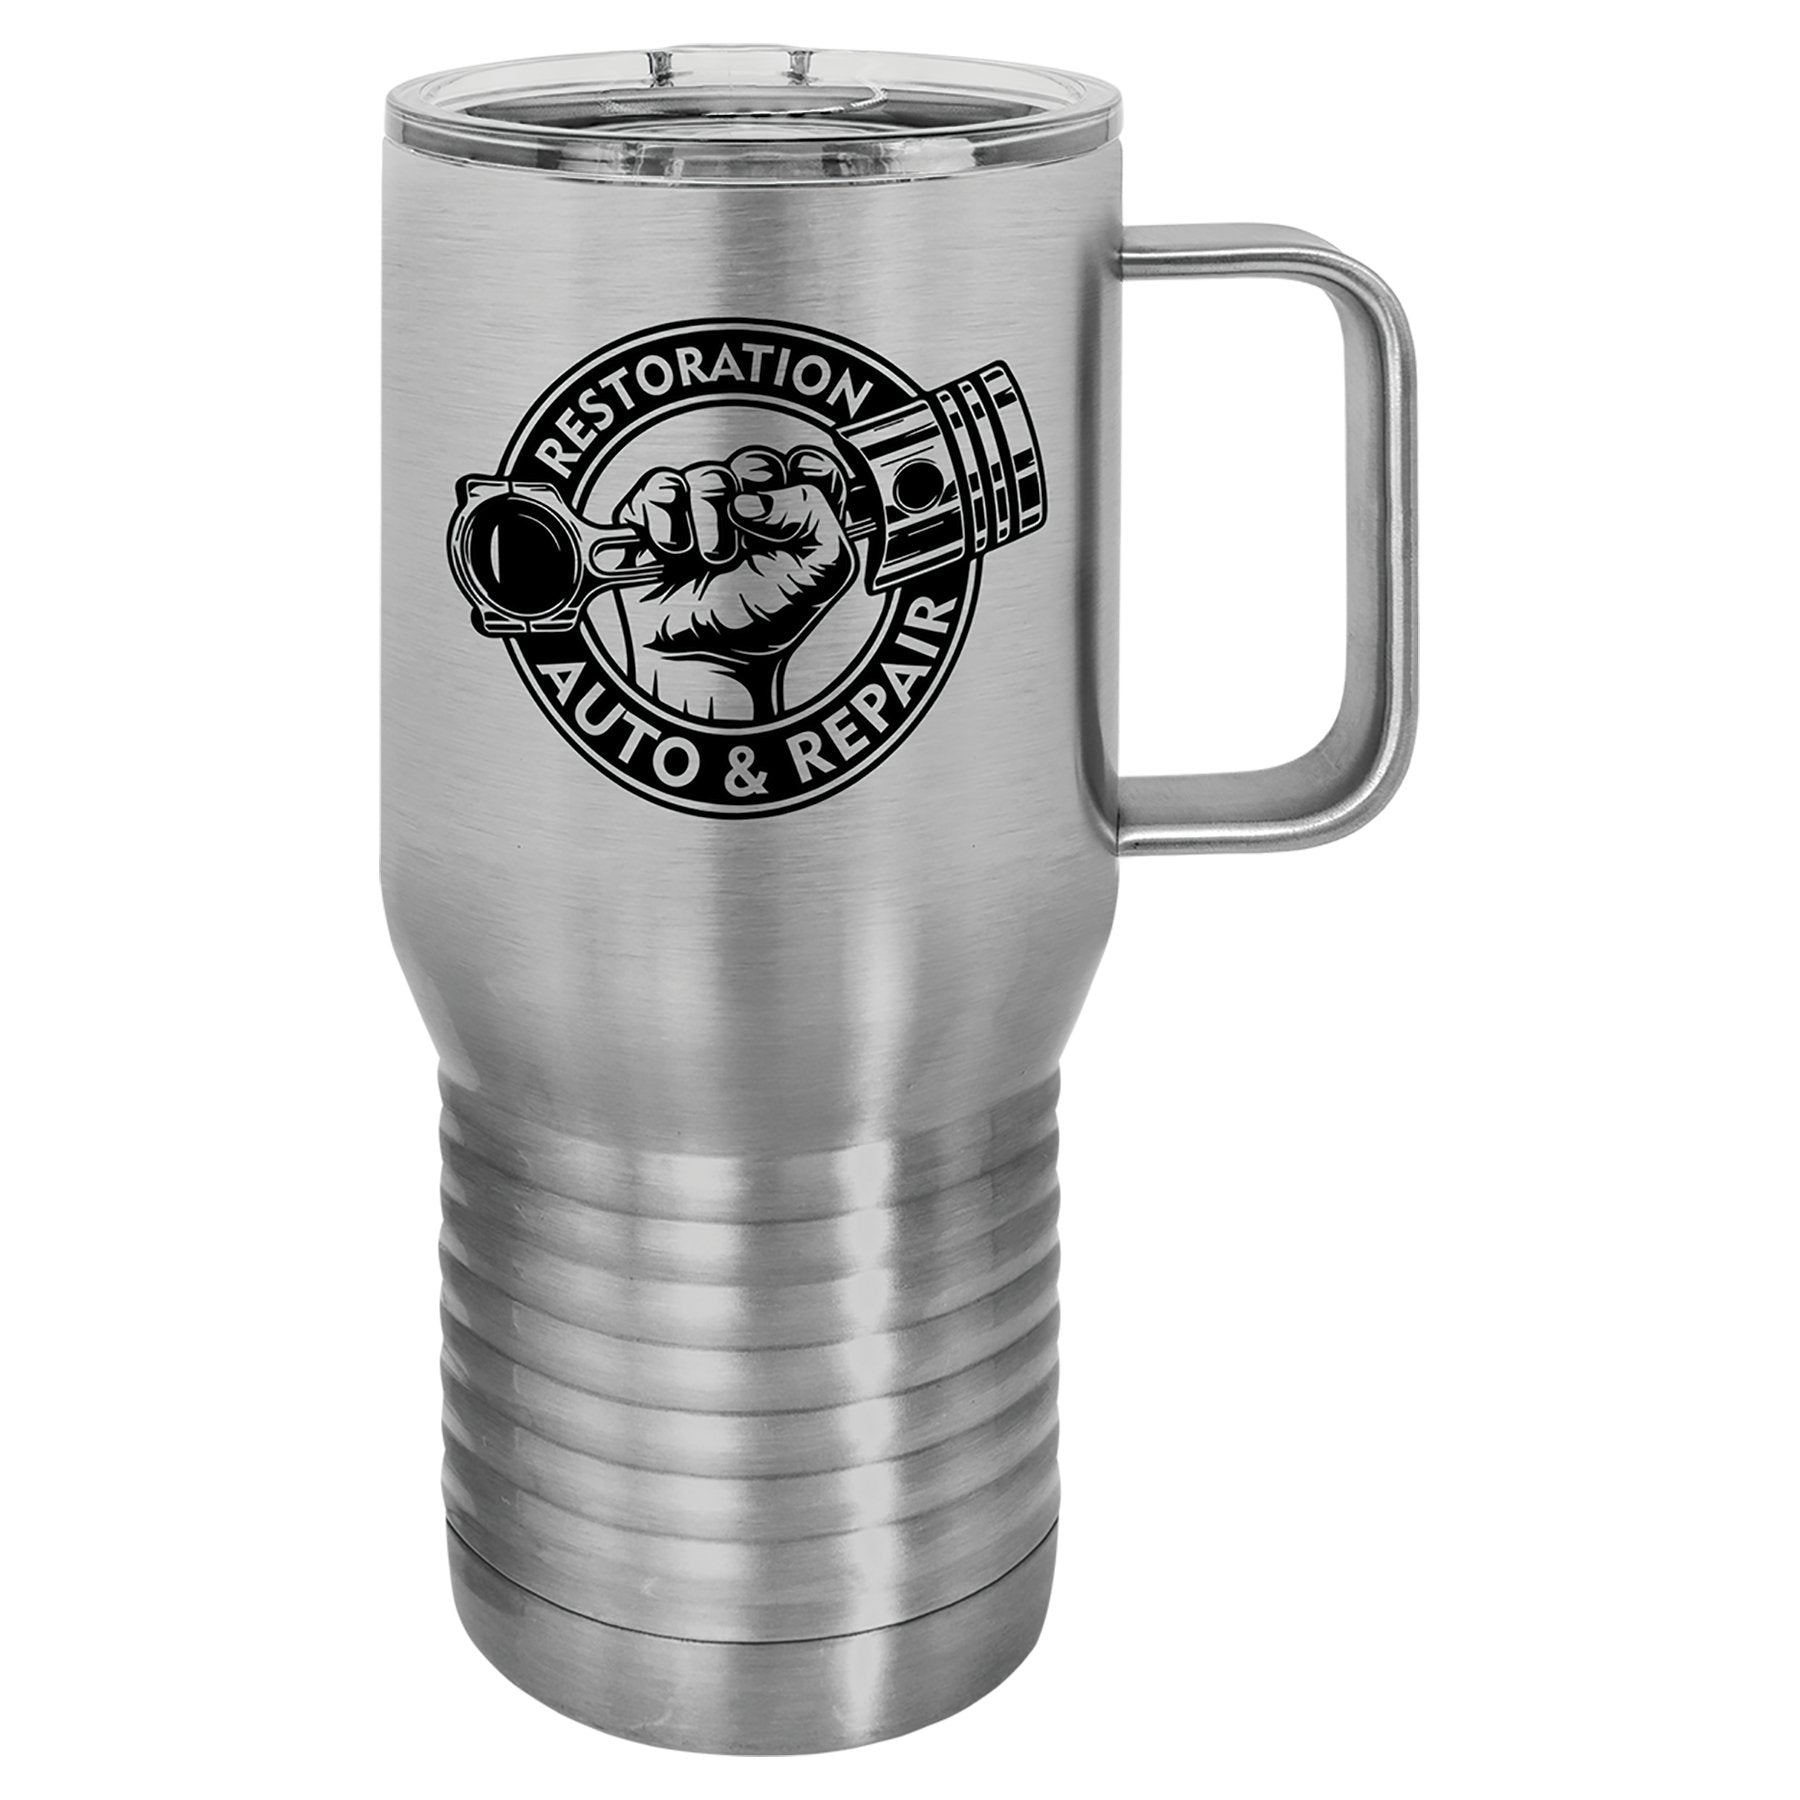 20 oz Vacuum Insulated Travel Mug with Slider Lid - Personalized